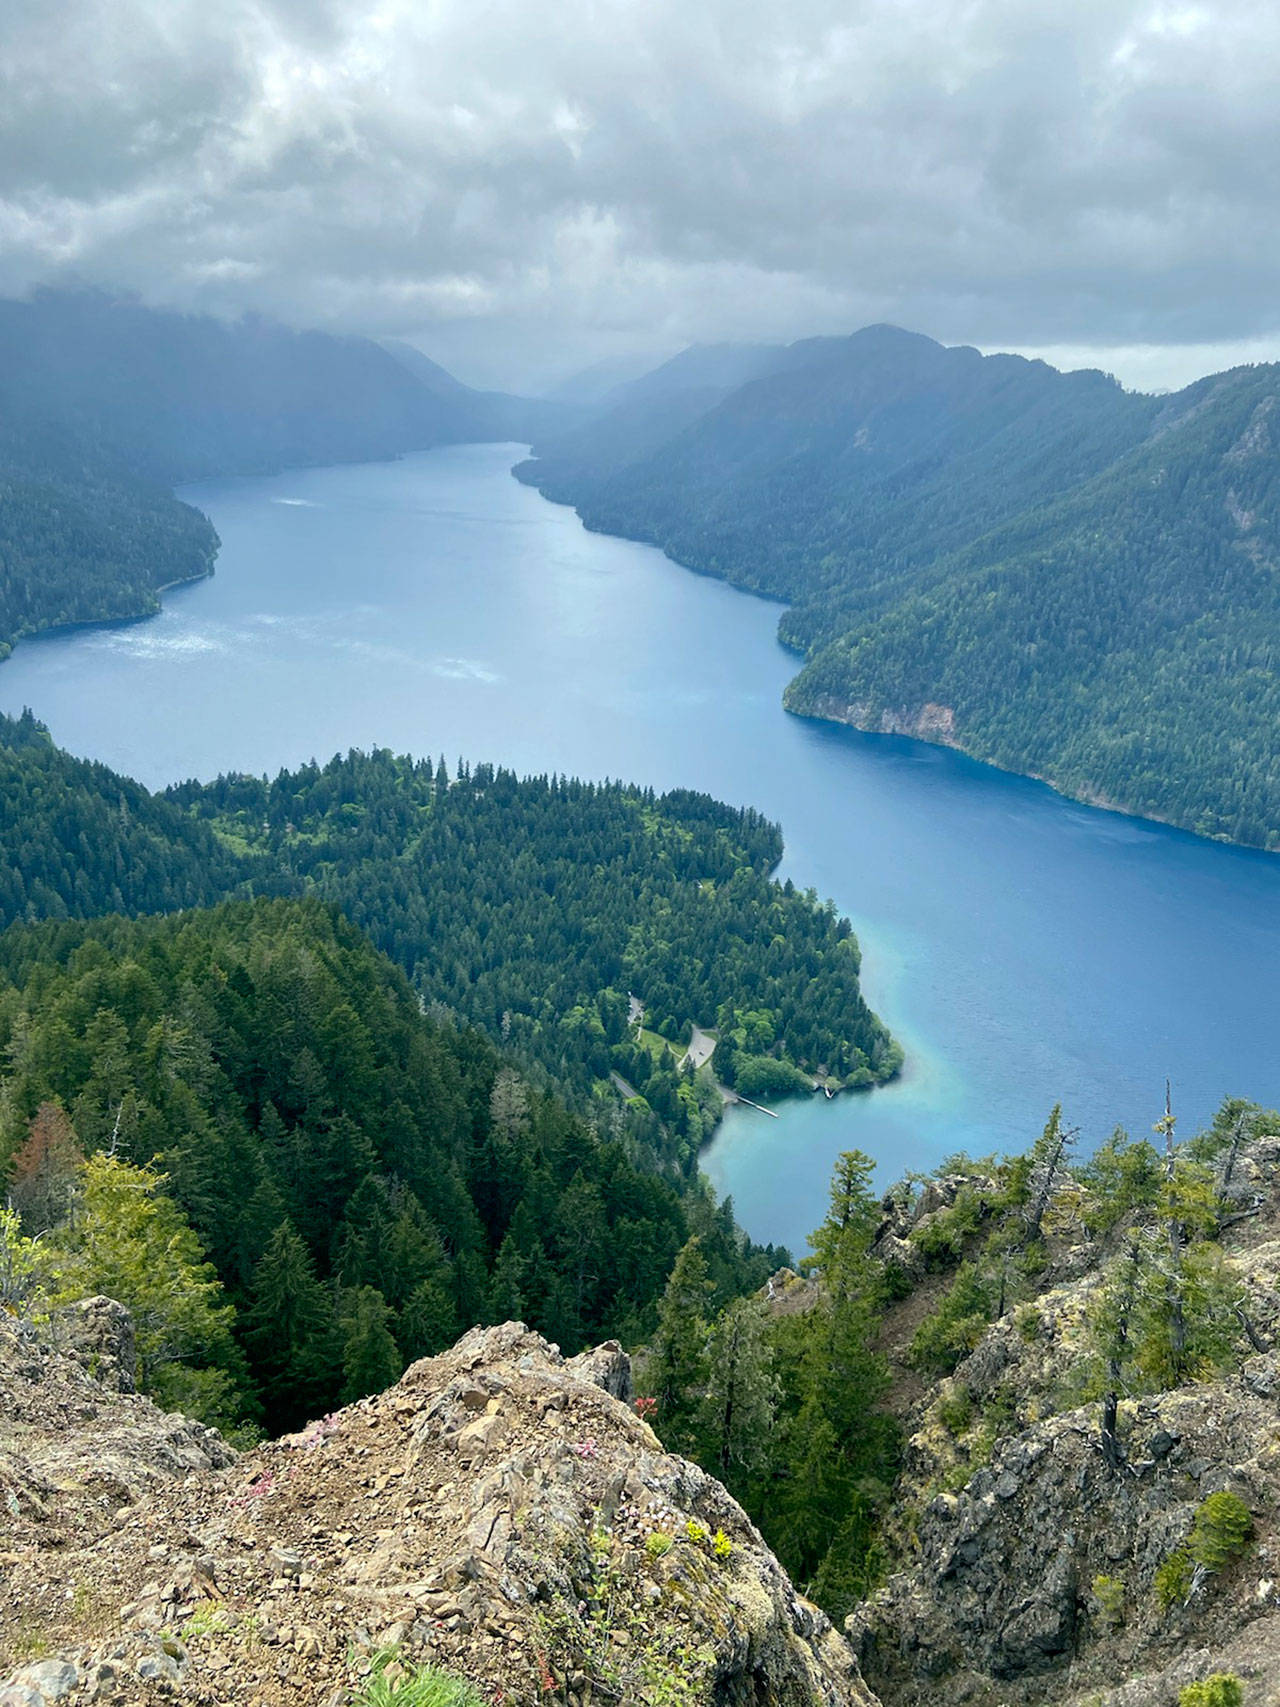 Lake Crescent as seen from Mount Storm King on Friday, May 22, 2020. (Rob Ollikainen/Peninsula Daily News)